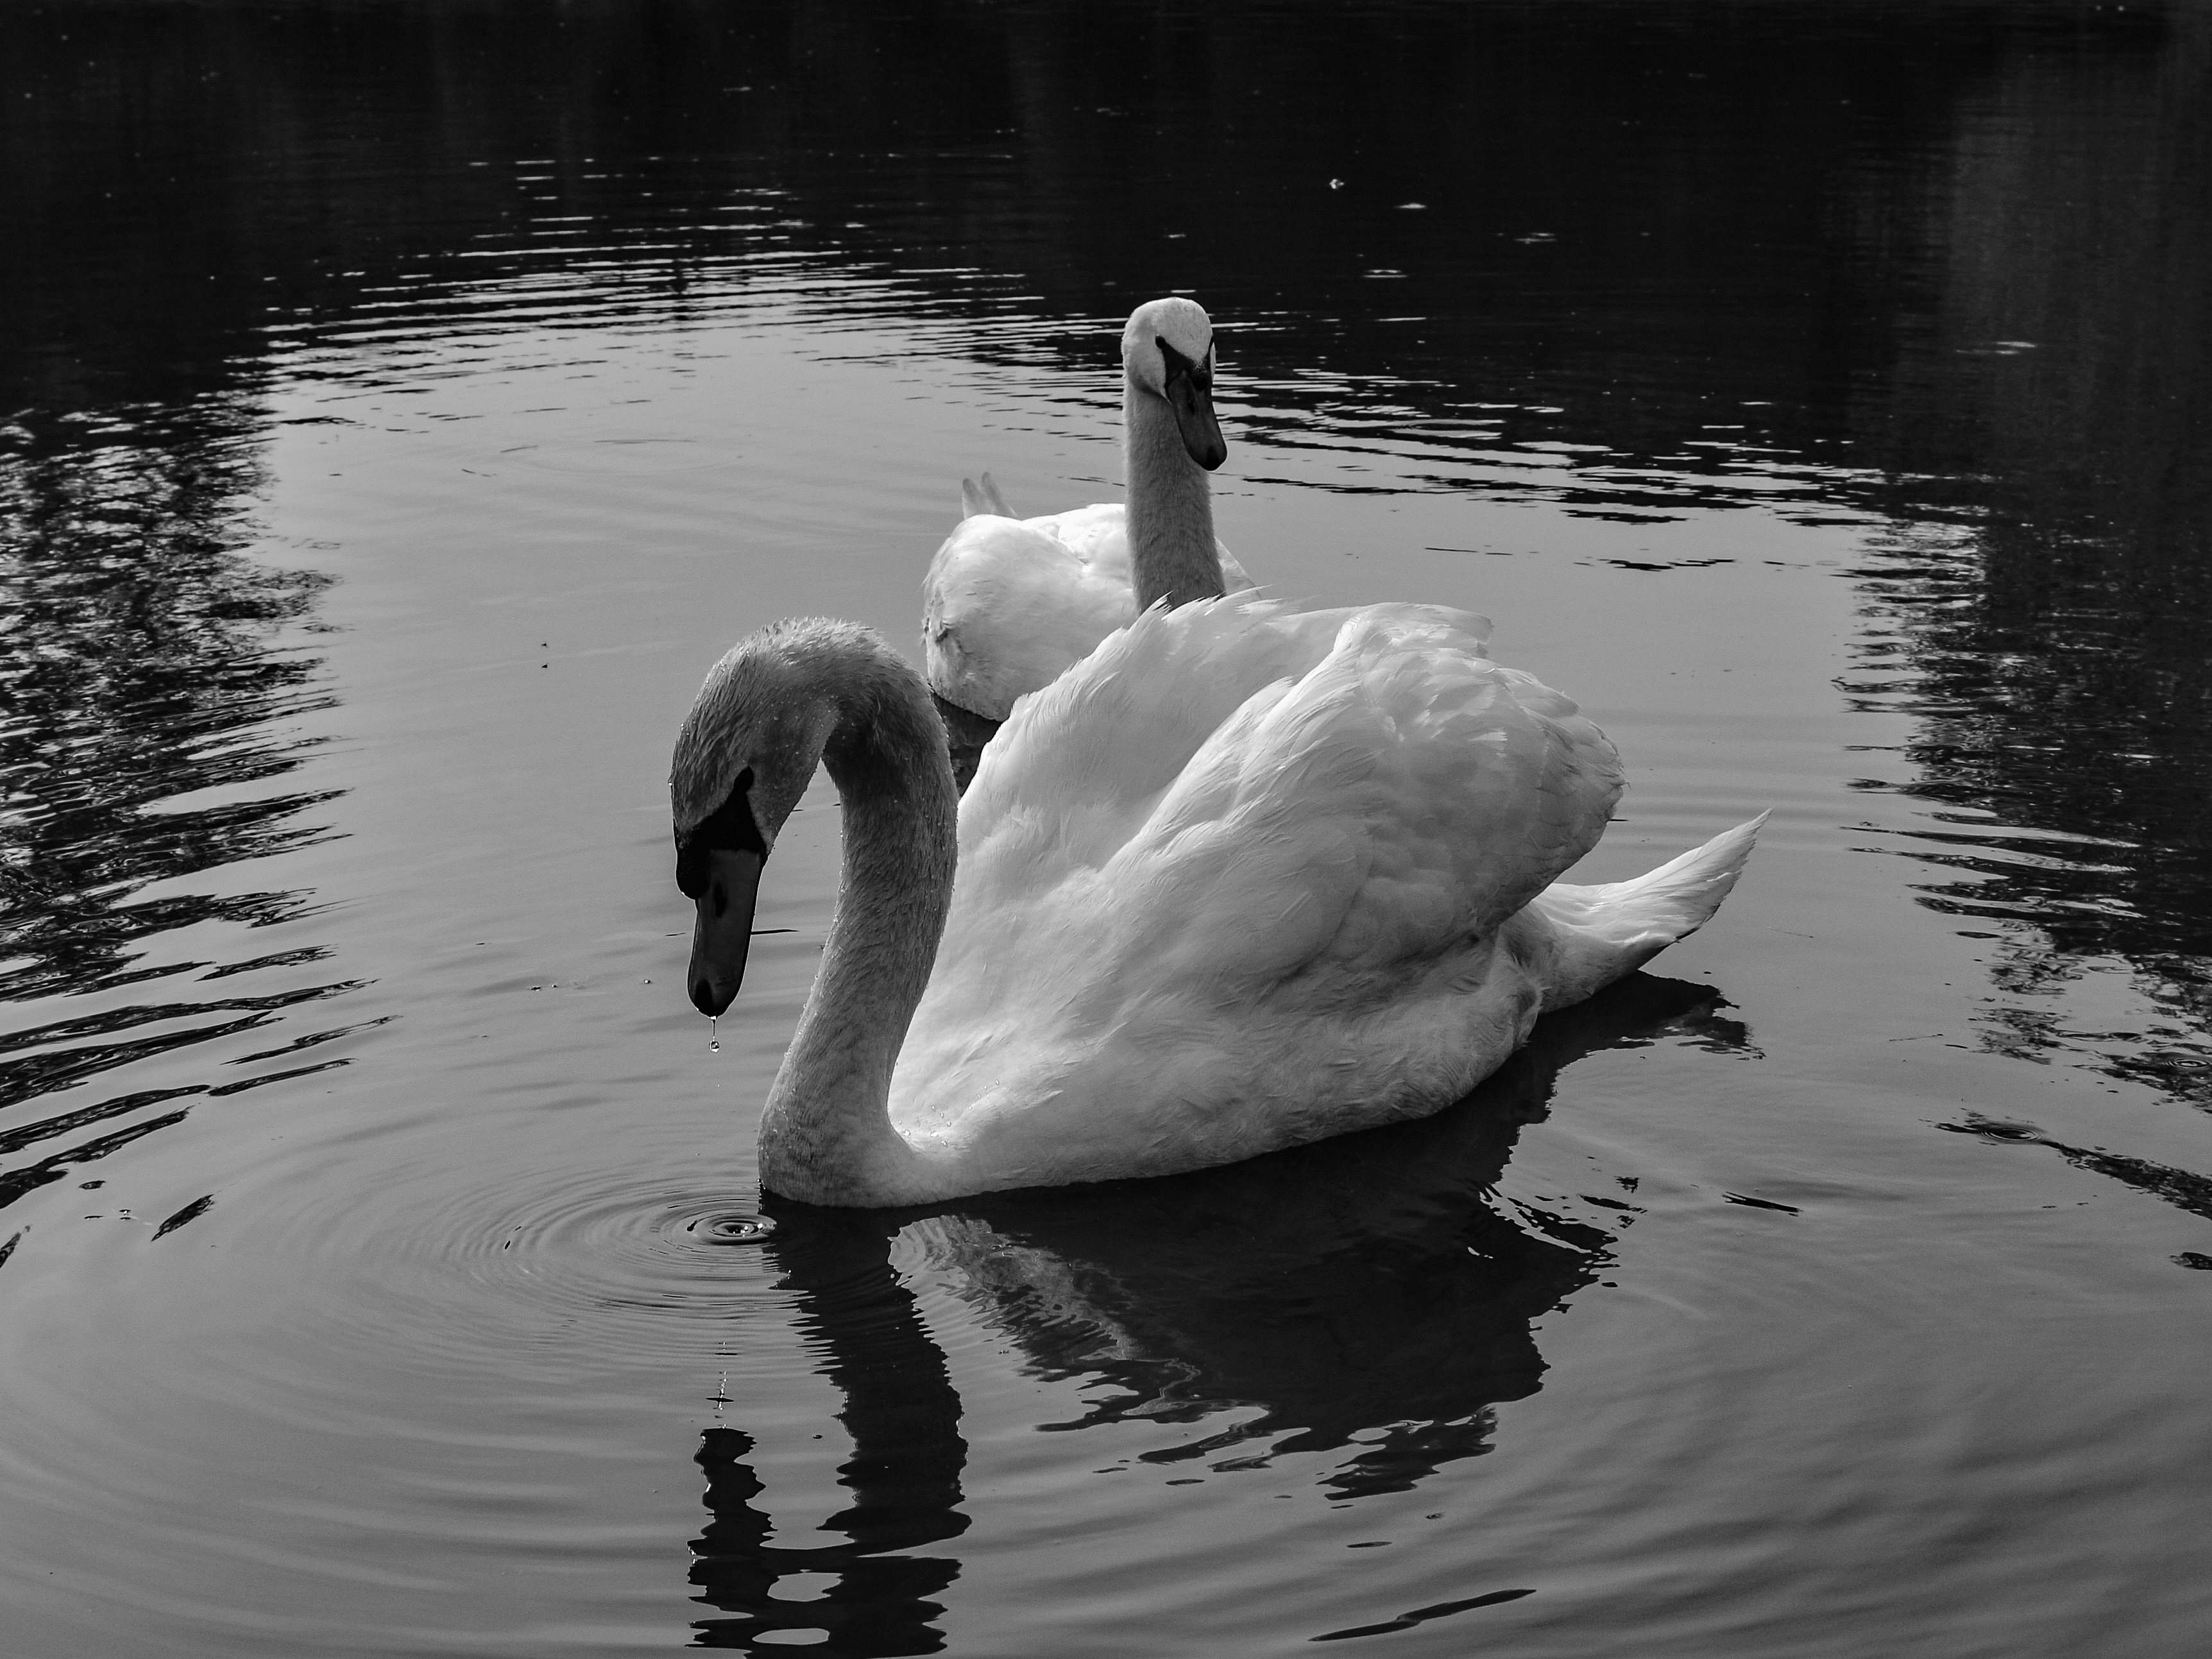 Water Two Swans Paddling On Calm Water Bird Image Free Photo